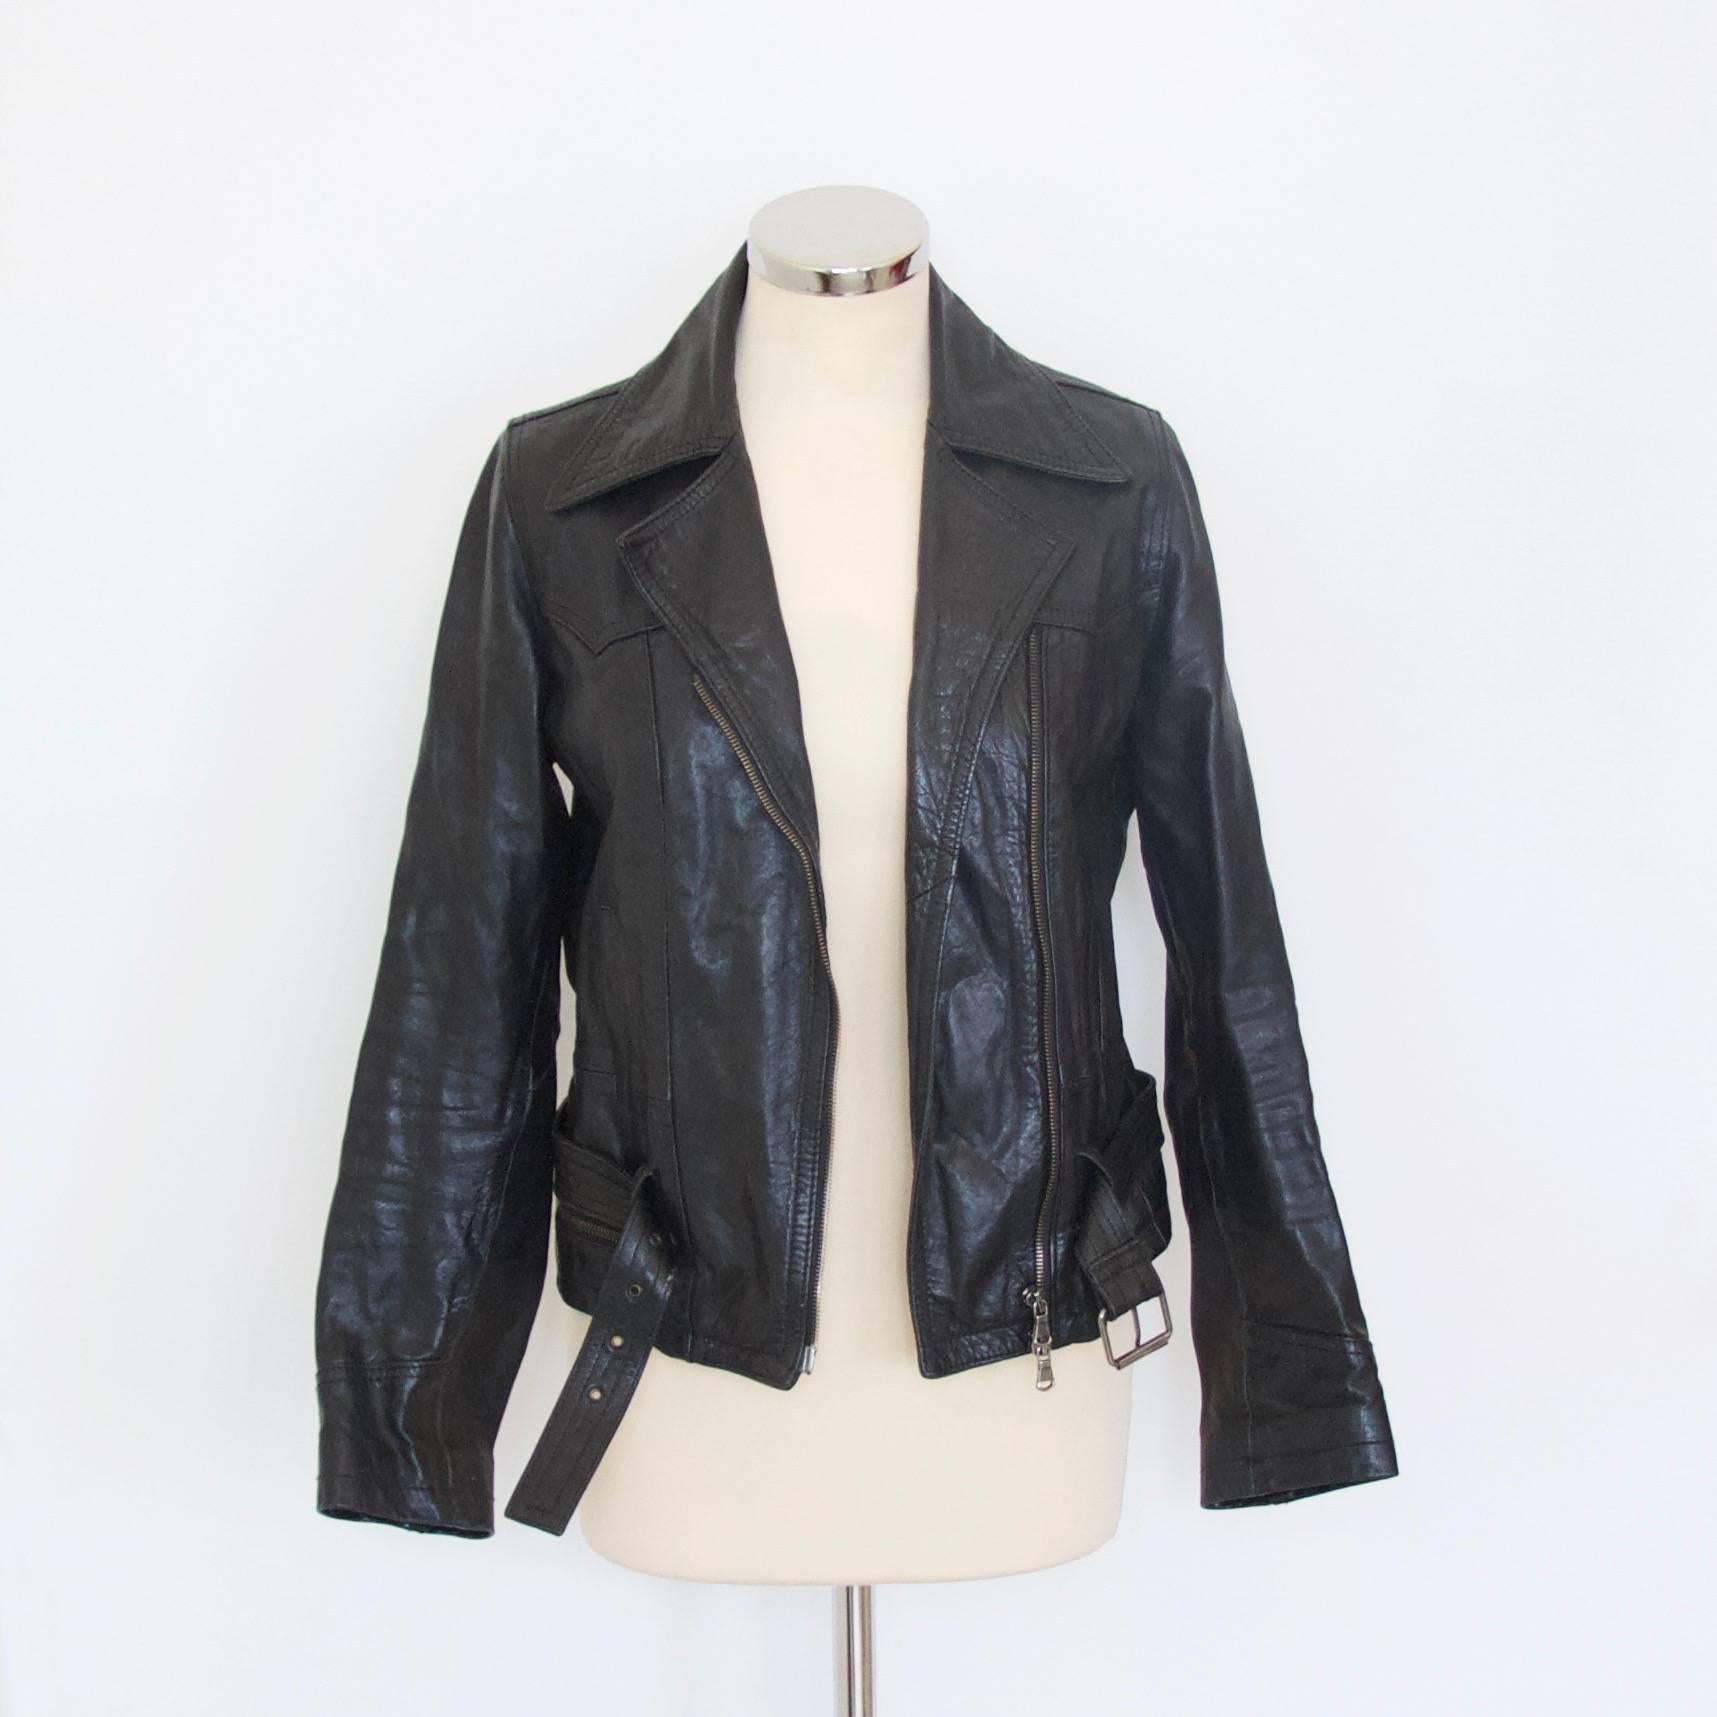 Adriano Goldschmied black leather jacket In Good Condition For Sale In London, GB